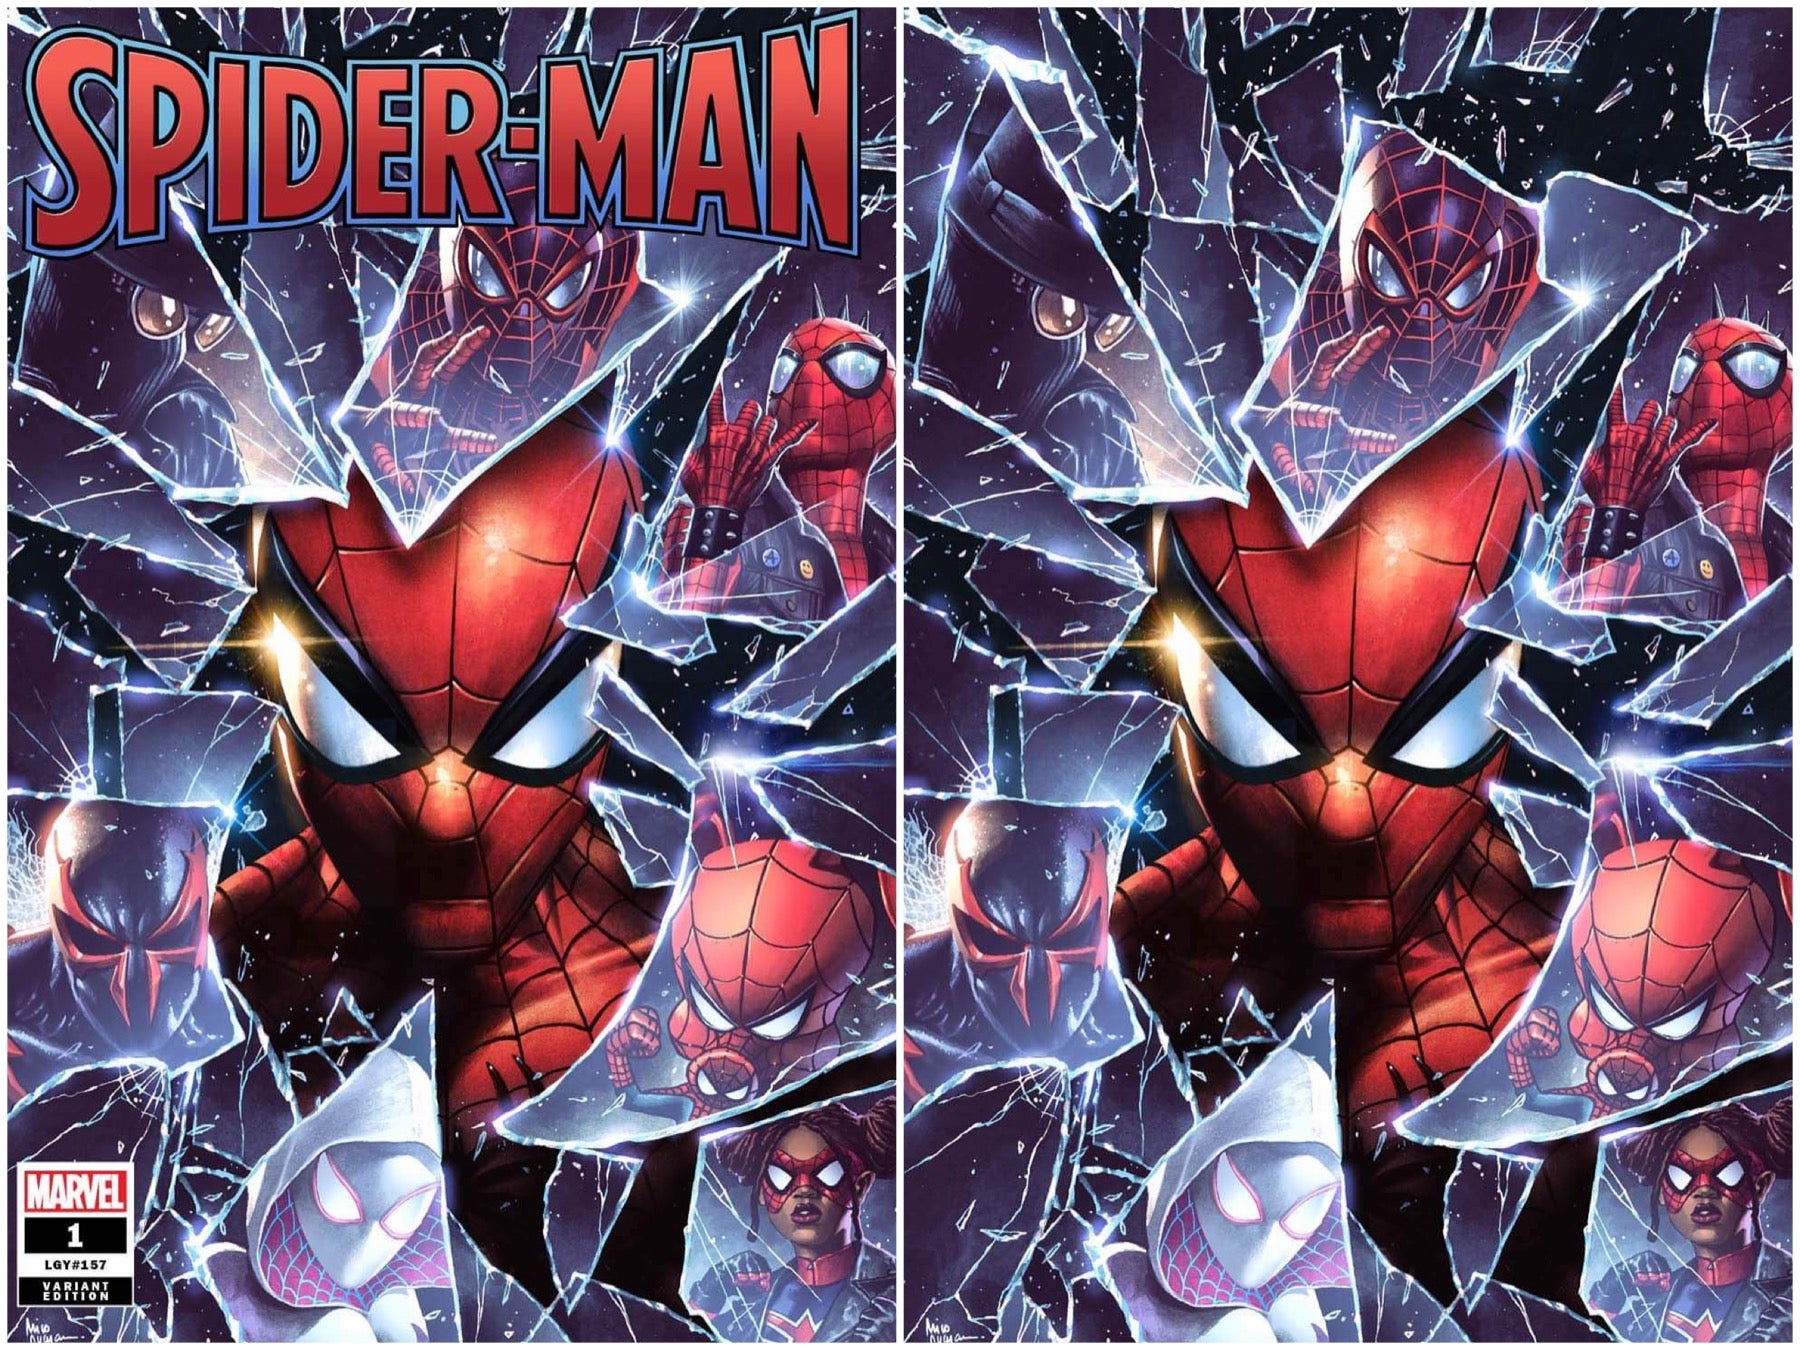 10/05/2022 SPIDER-MAN #1 MICO SUAYAN EXCLUSIVE VARIANT OPTIONS (M5)